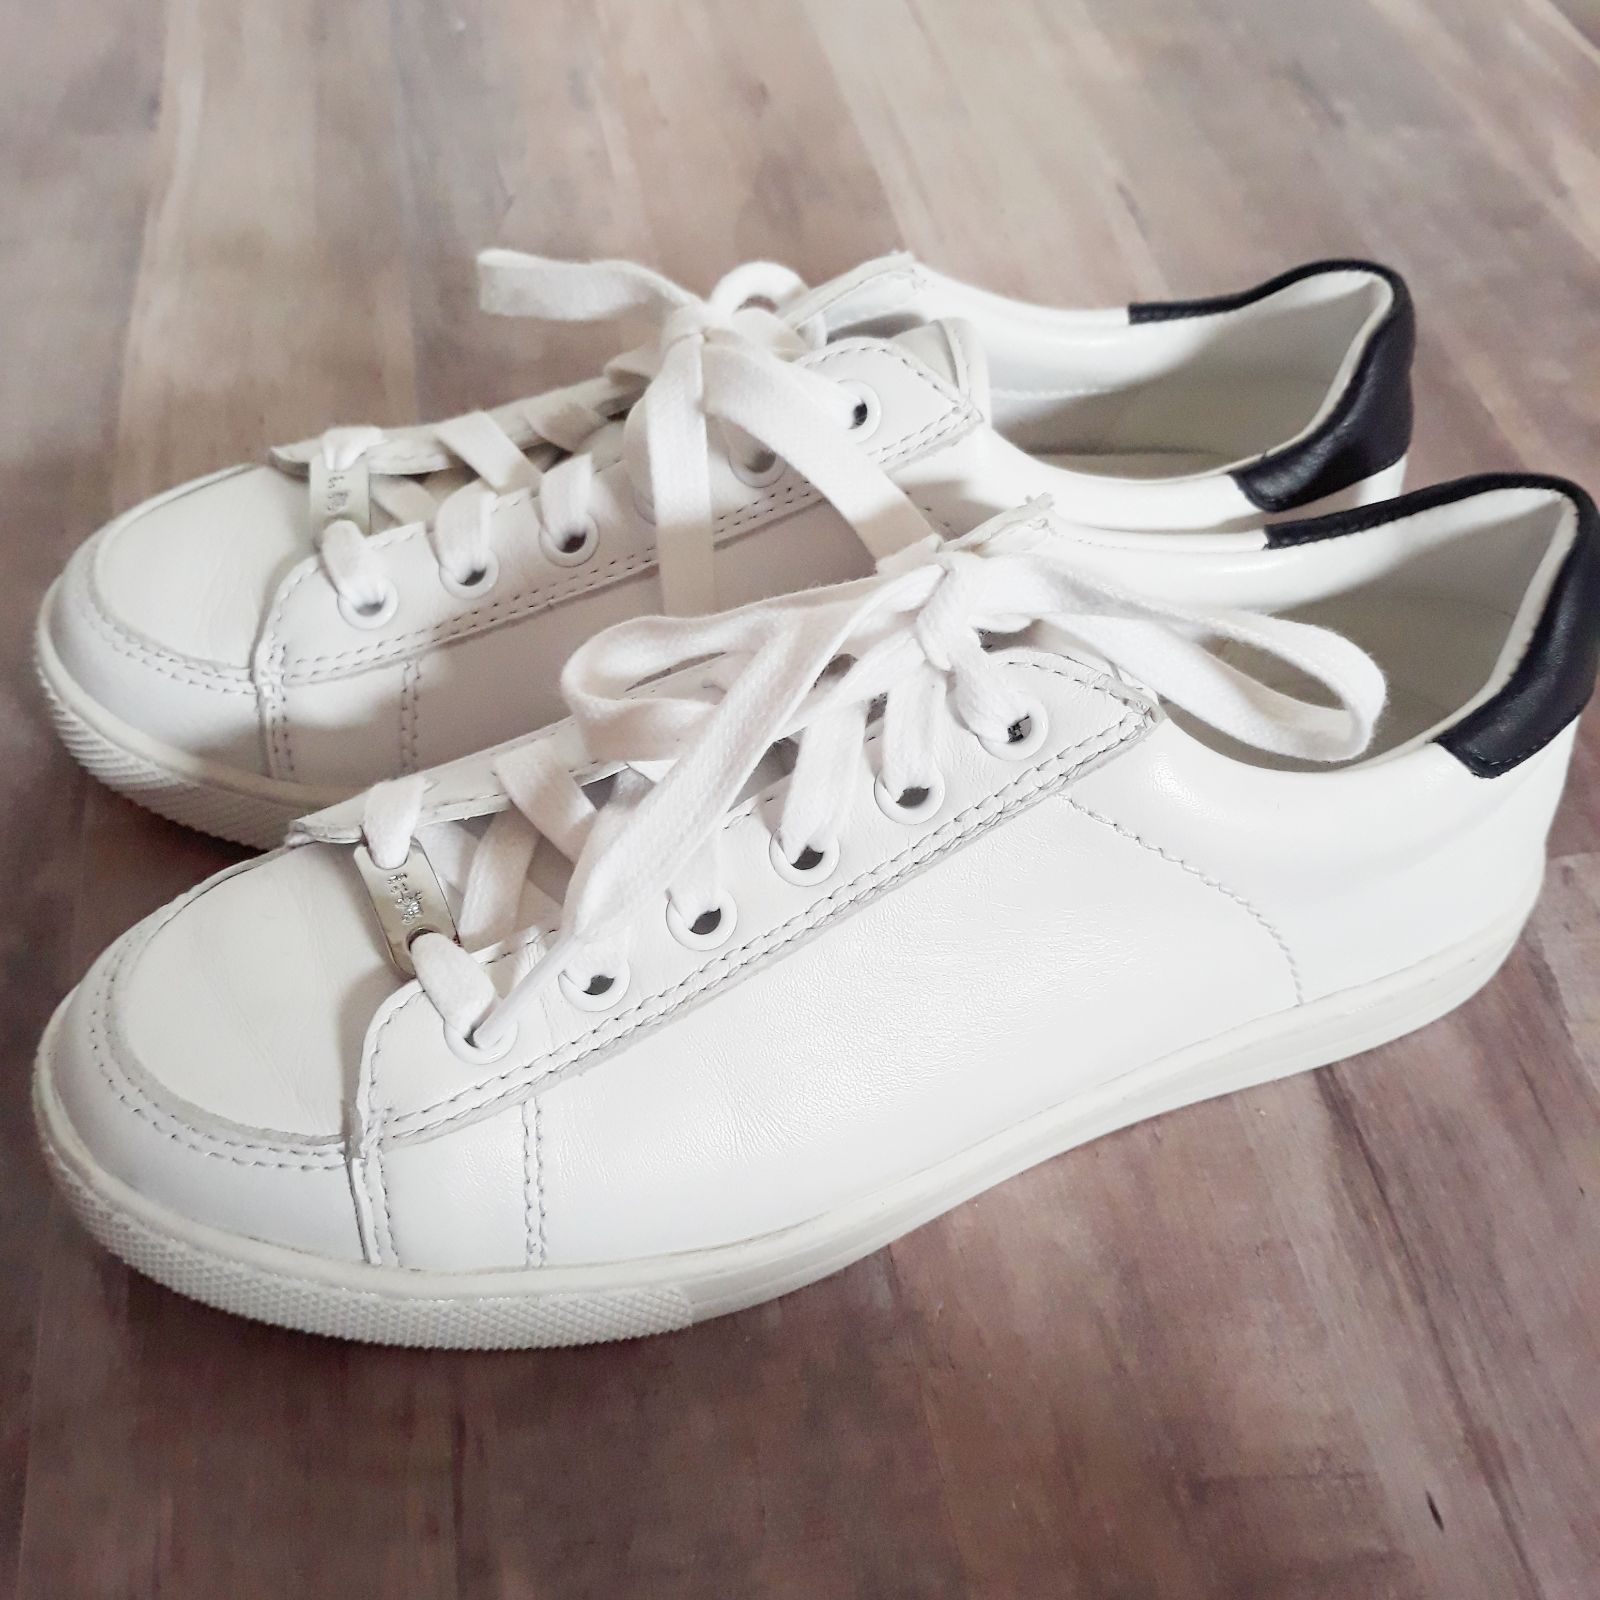 White leather tennis shoes by Coach. Features black heels and silver ...